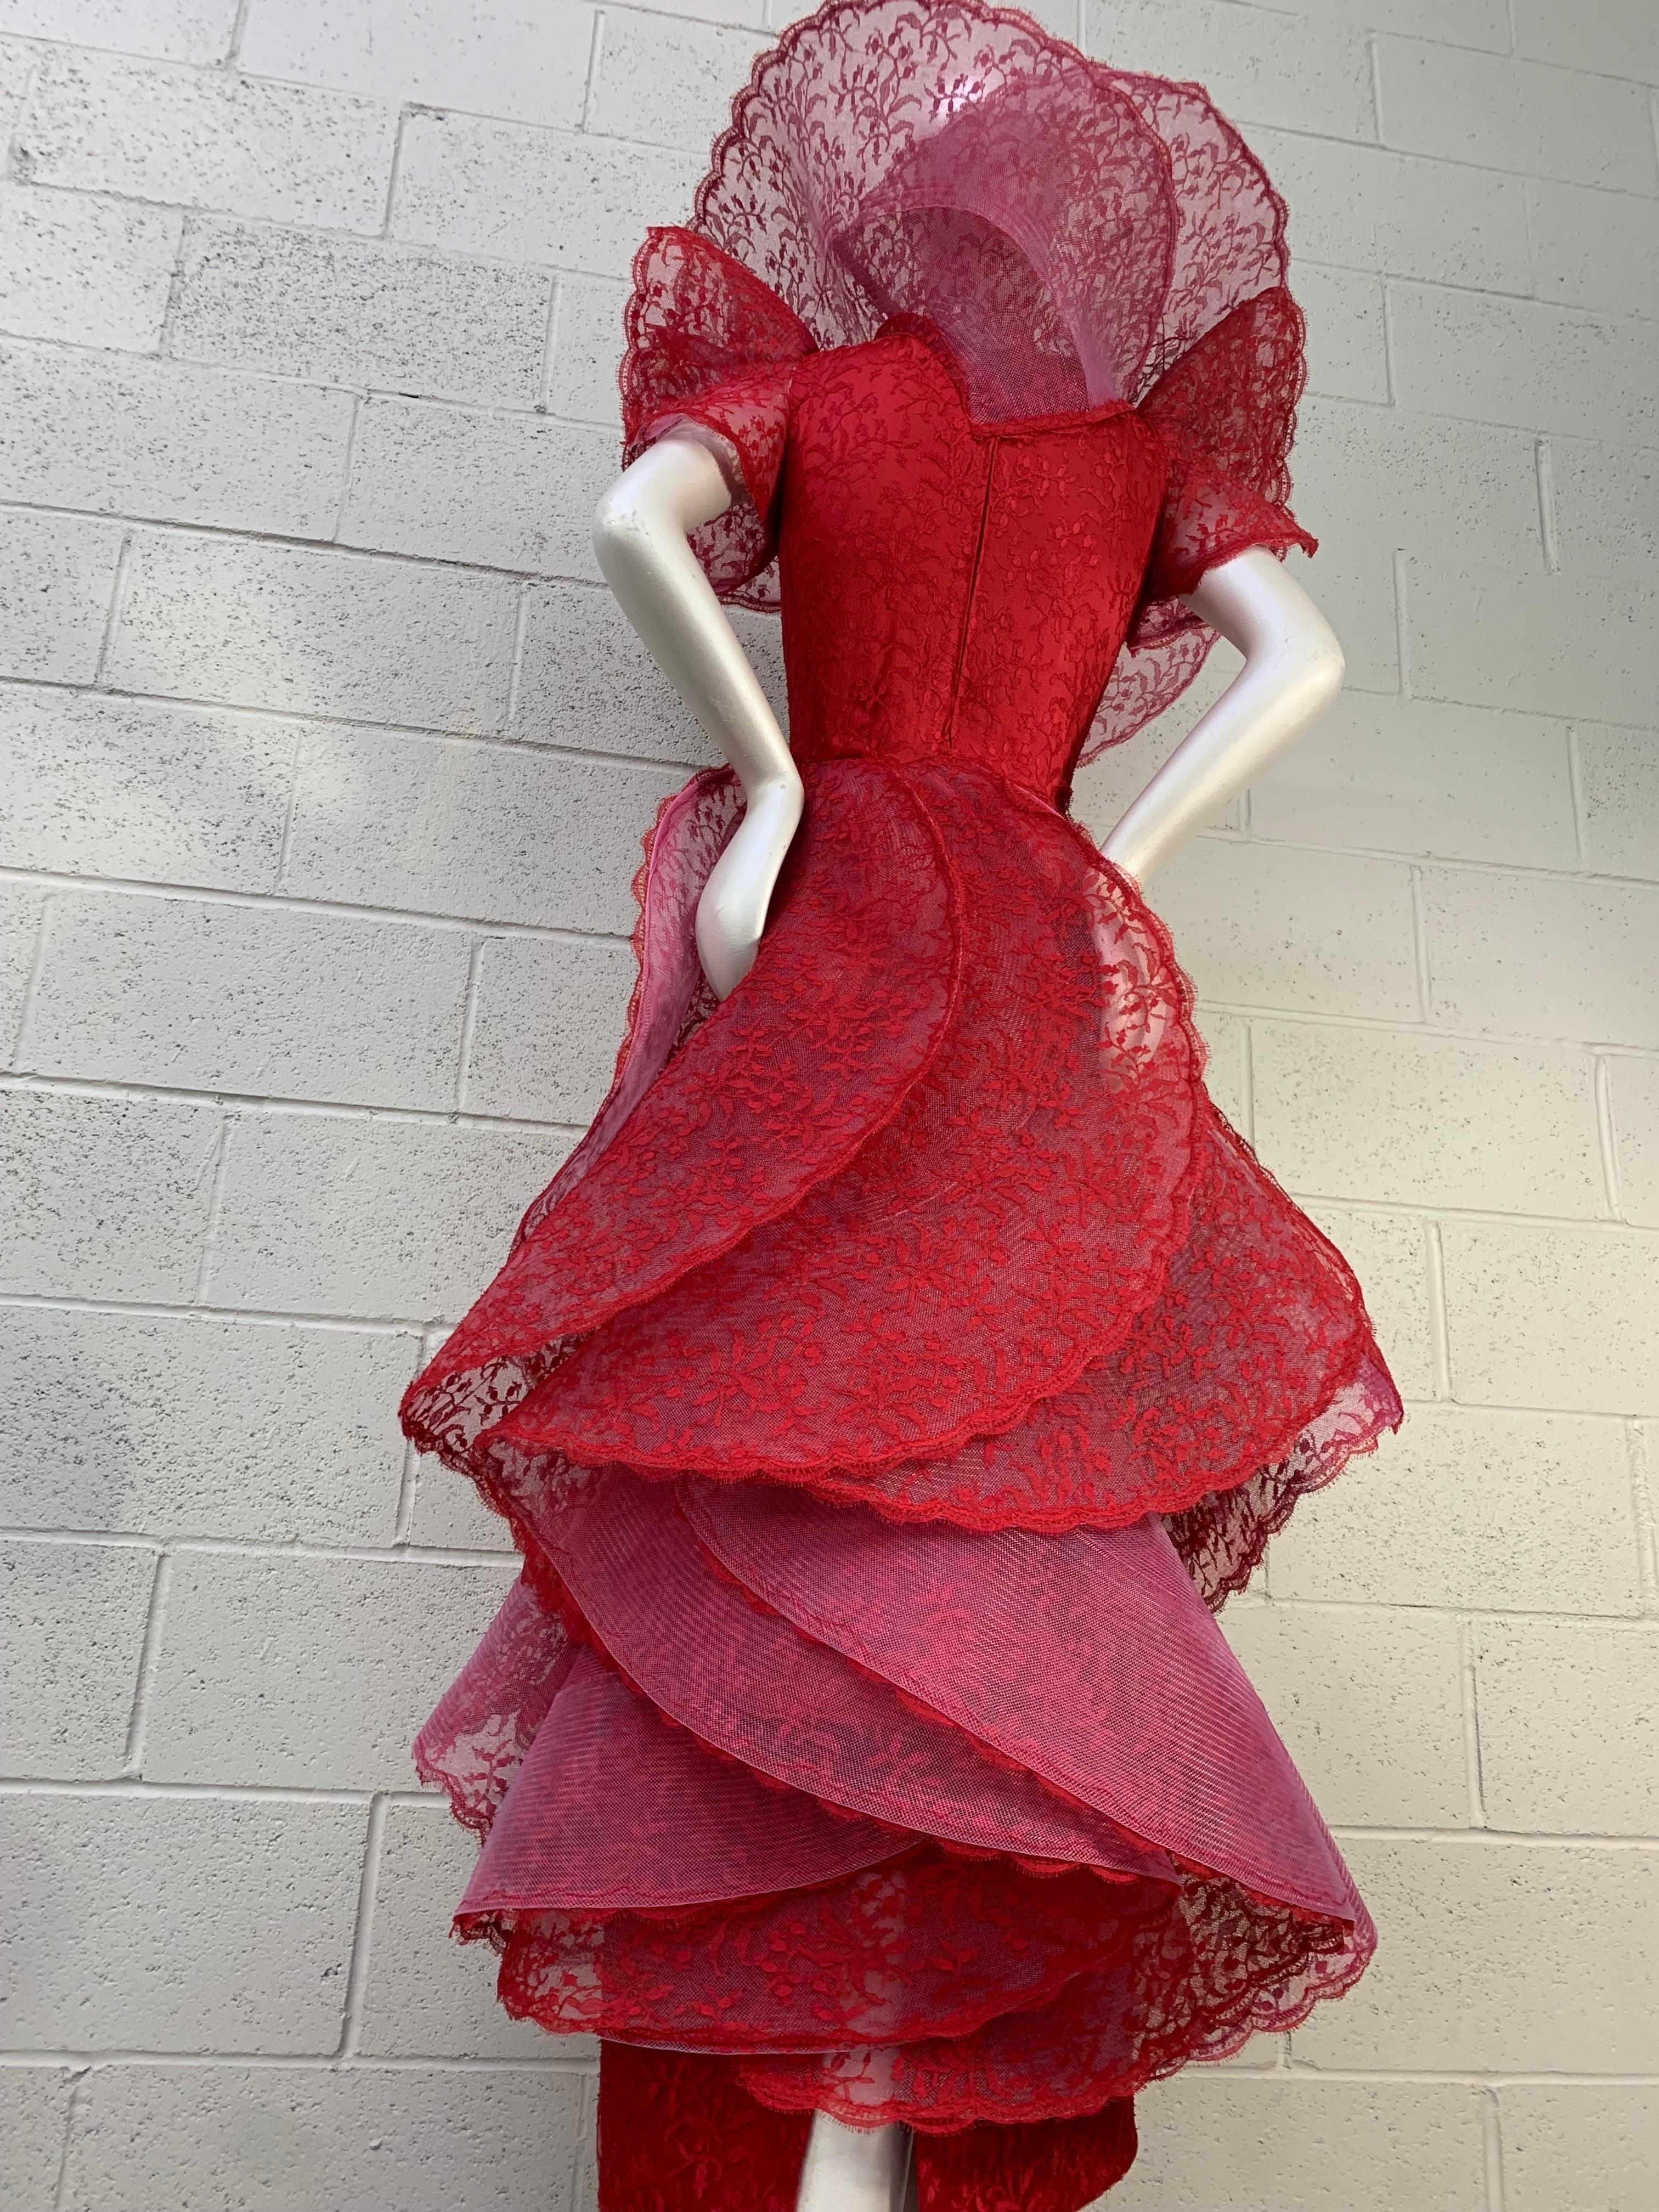 1987 Pierre Cardin Haute Couture Tiered Flounce Lace Dress - Extremely Rare 7